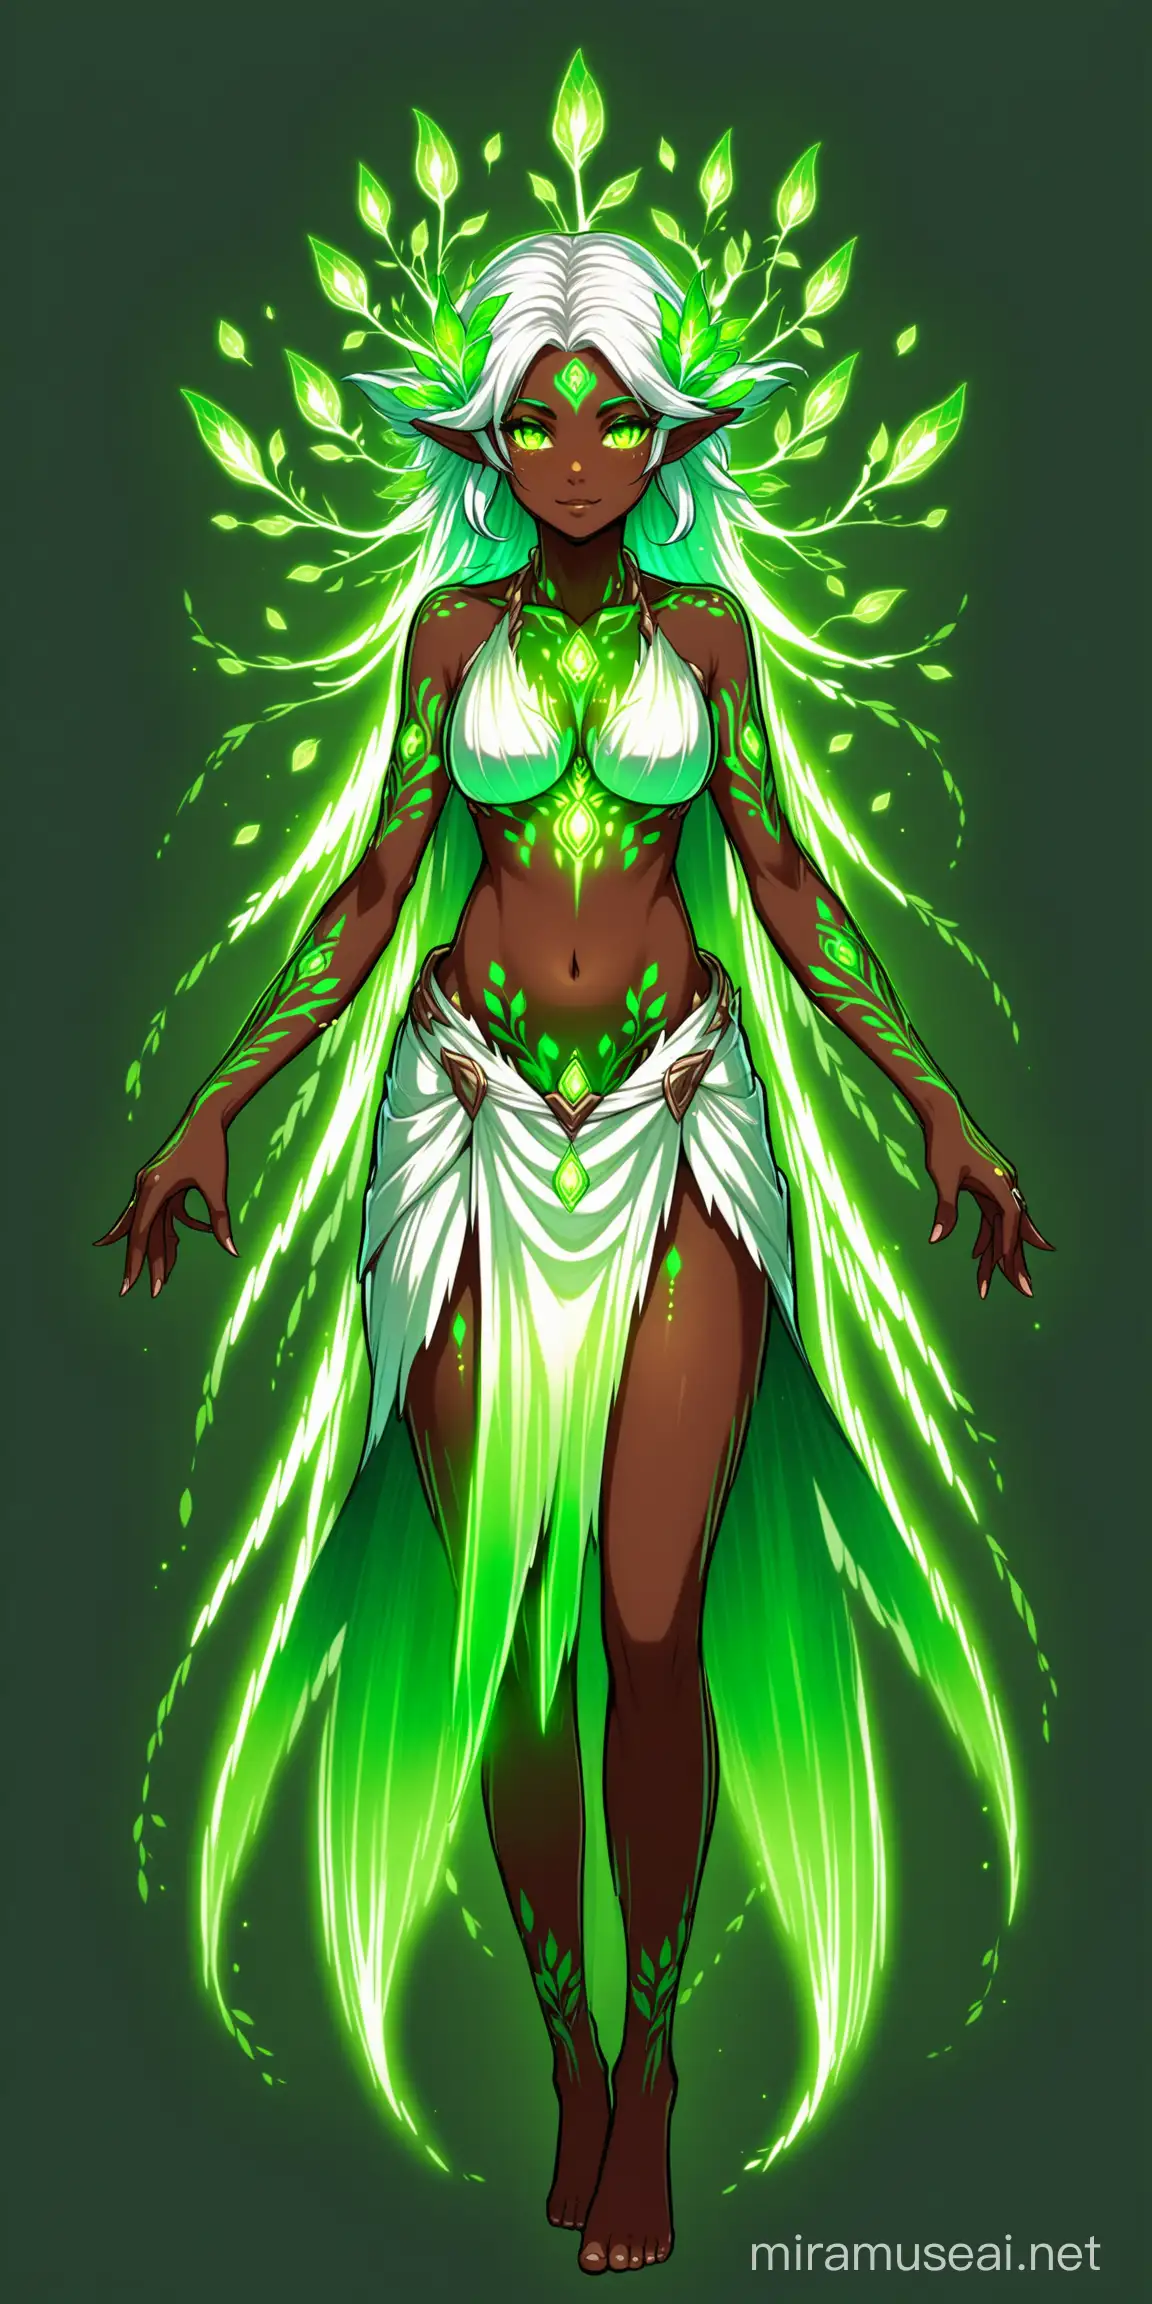 Mature Dryad Woman with Glowing Green Tattoos and White Hair Character Sprite